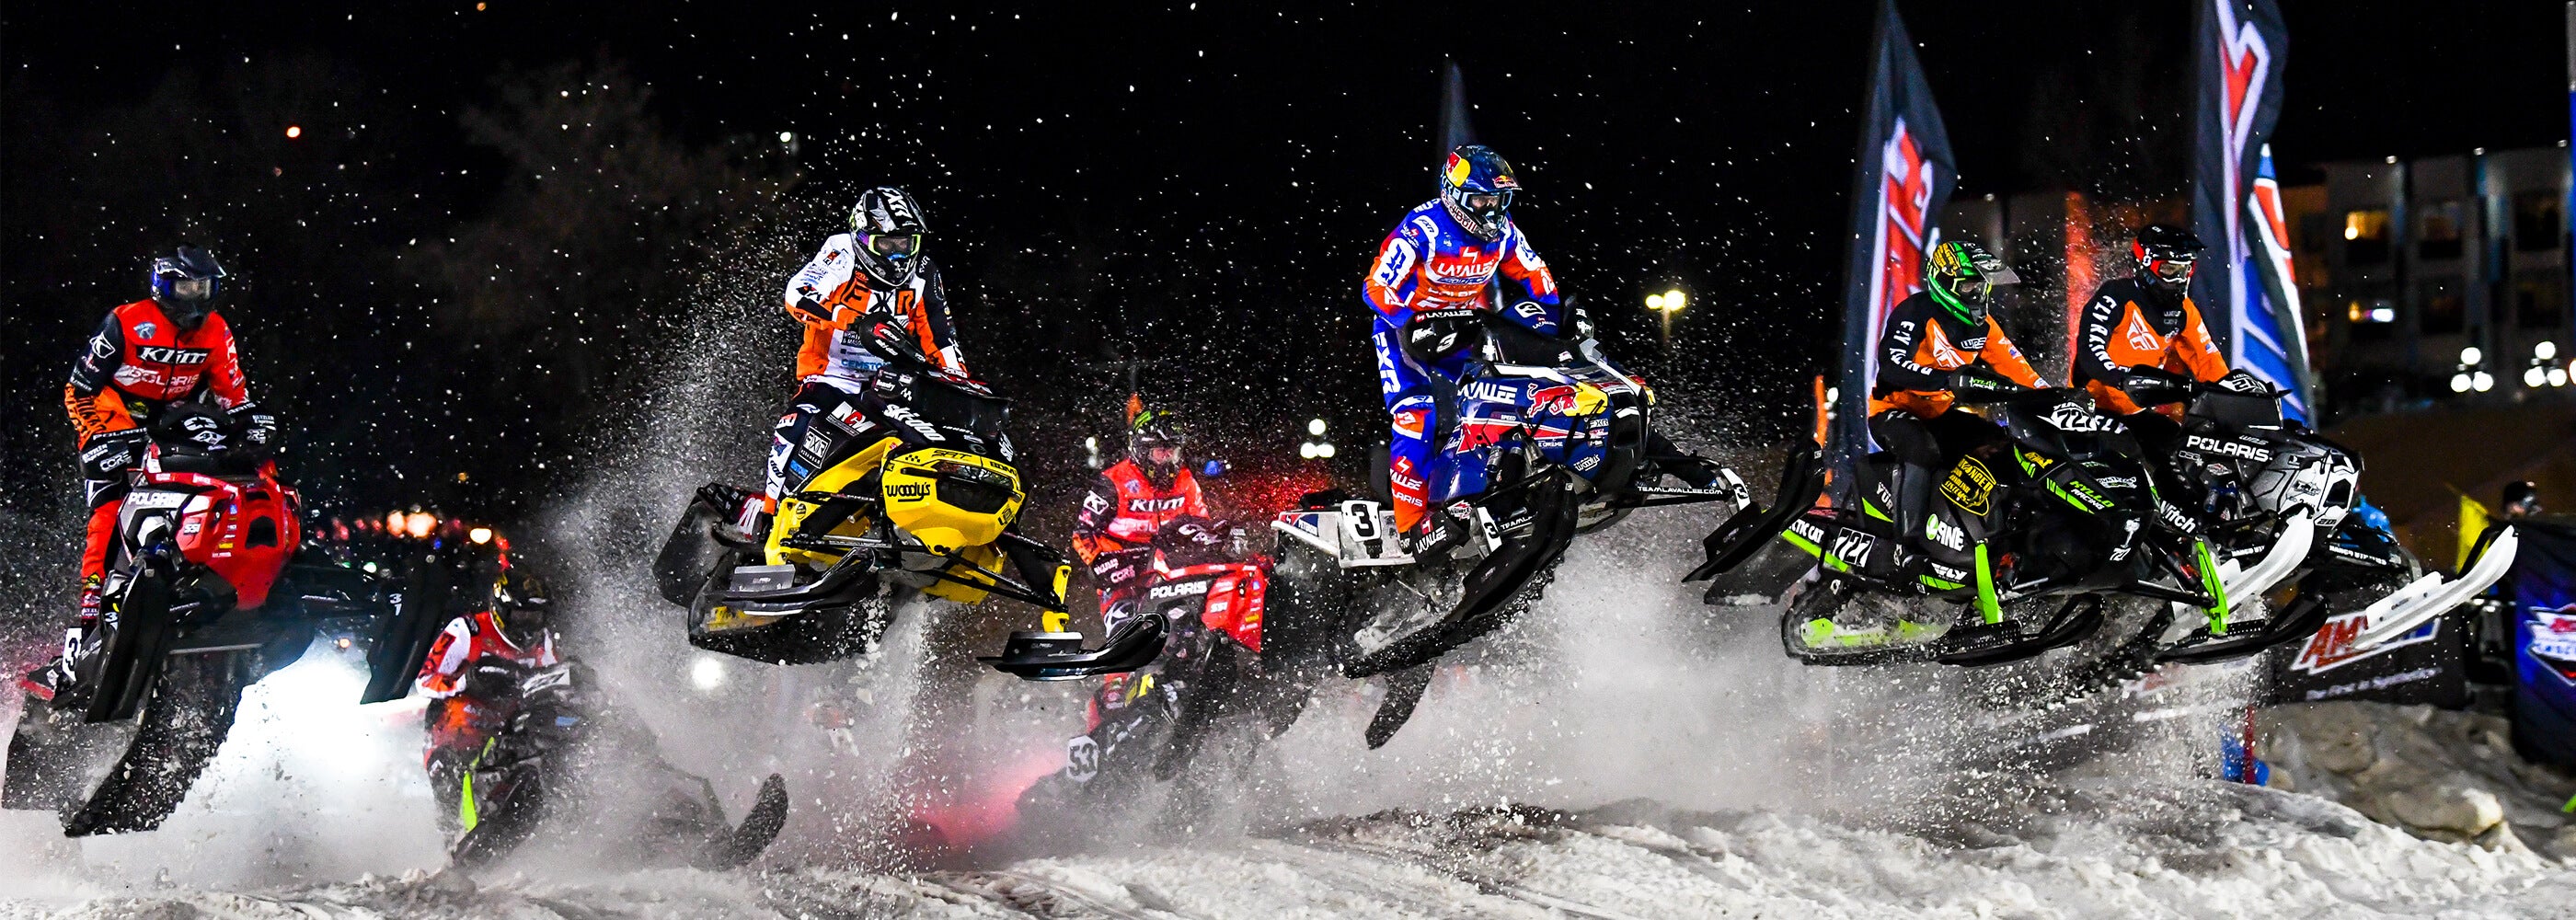 Group of pro Snocross racers at Amsoil ISOC Snocross race